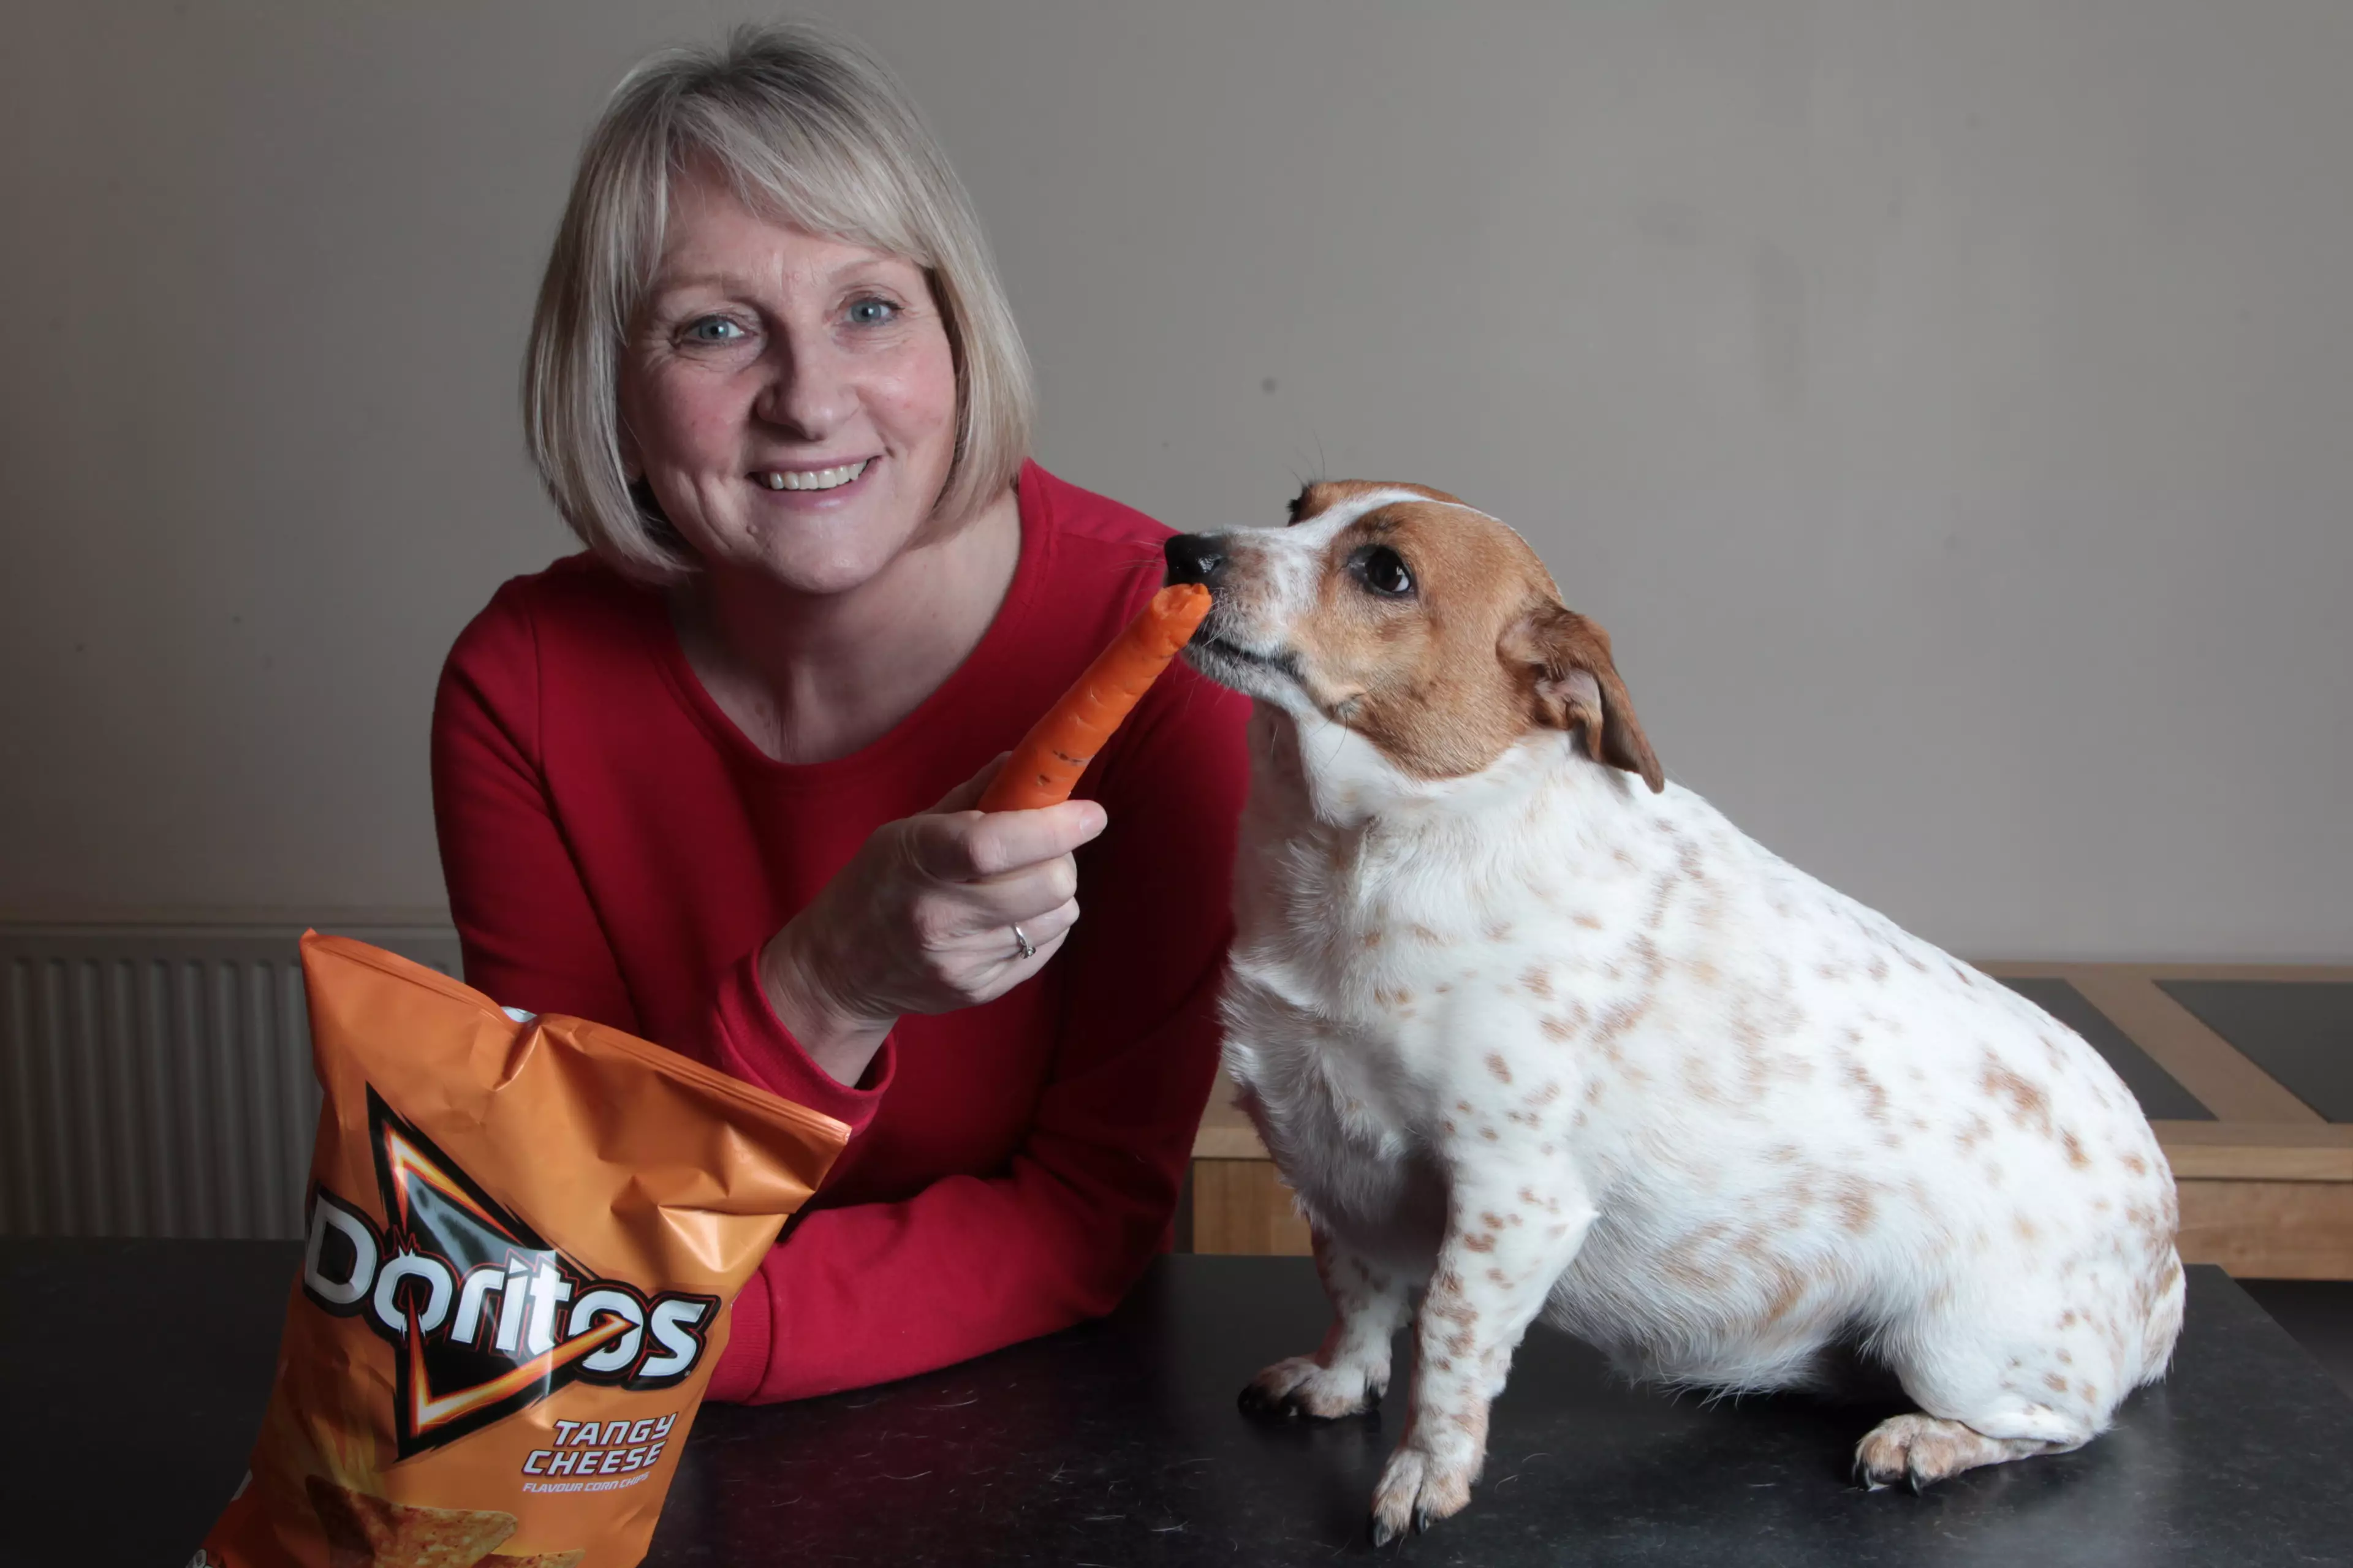 Mandy is now swapping Doritos for carrots.